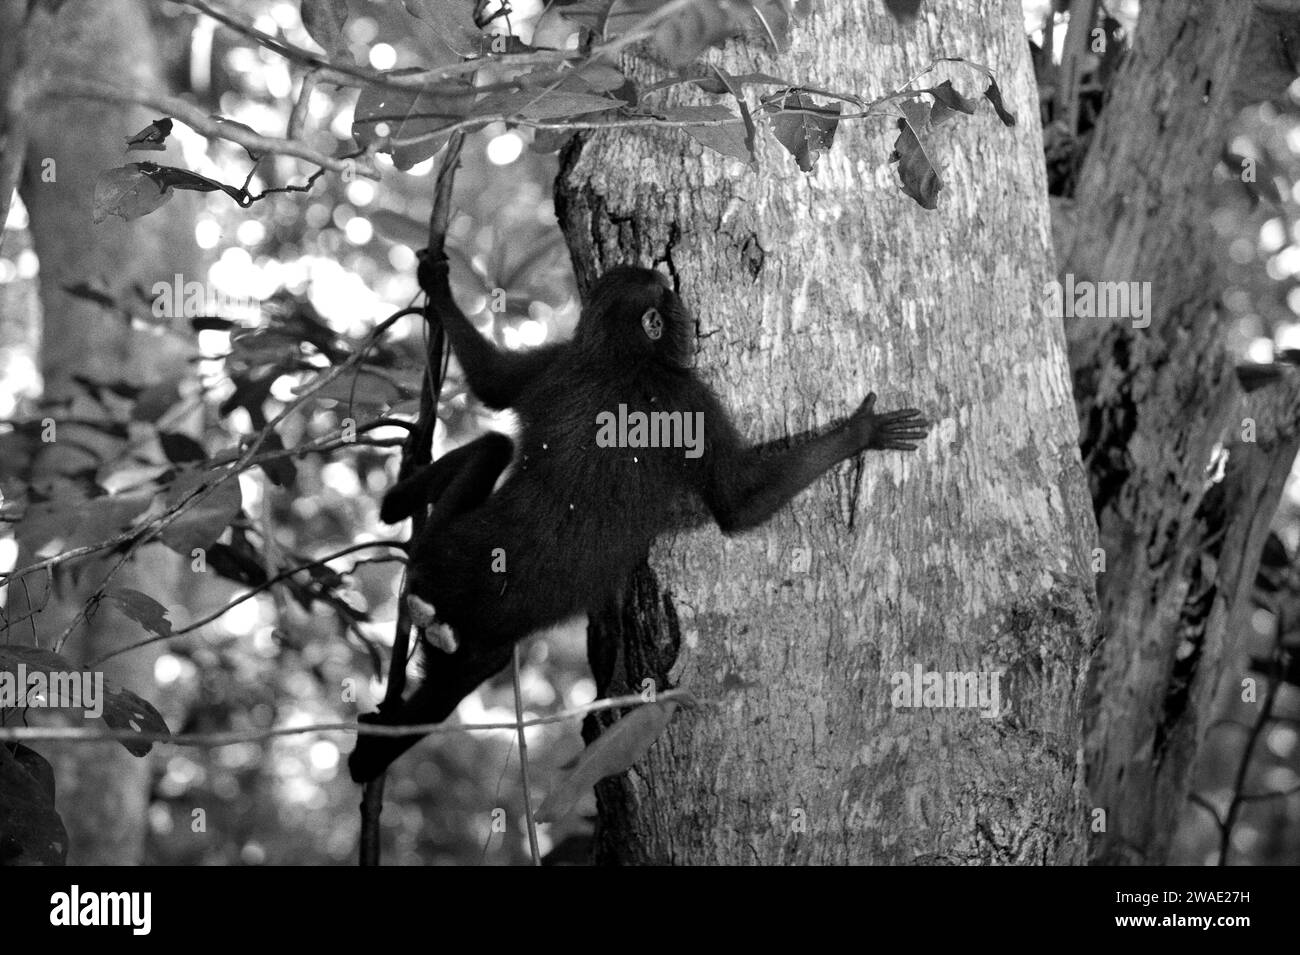 A crested macaque (Macaca nigra) moves on a tree trunk in Tangkoko forest, North Sulawesi, Indonesia. Primate conservation is a behavioural challenge and as such requires behaviourally informed solutions, according to a team of scientists led by Harry Hilser in their 2023 paper published by International Journal of Primatology. It also needs, they wrote, 'A holistic strategy of education, capacity building, and community-based conservation draws upon a blend of insights from multiple social scientific disciplines alongside direct research with communities in the area exploring their cultural.. Stock Photo